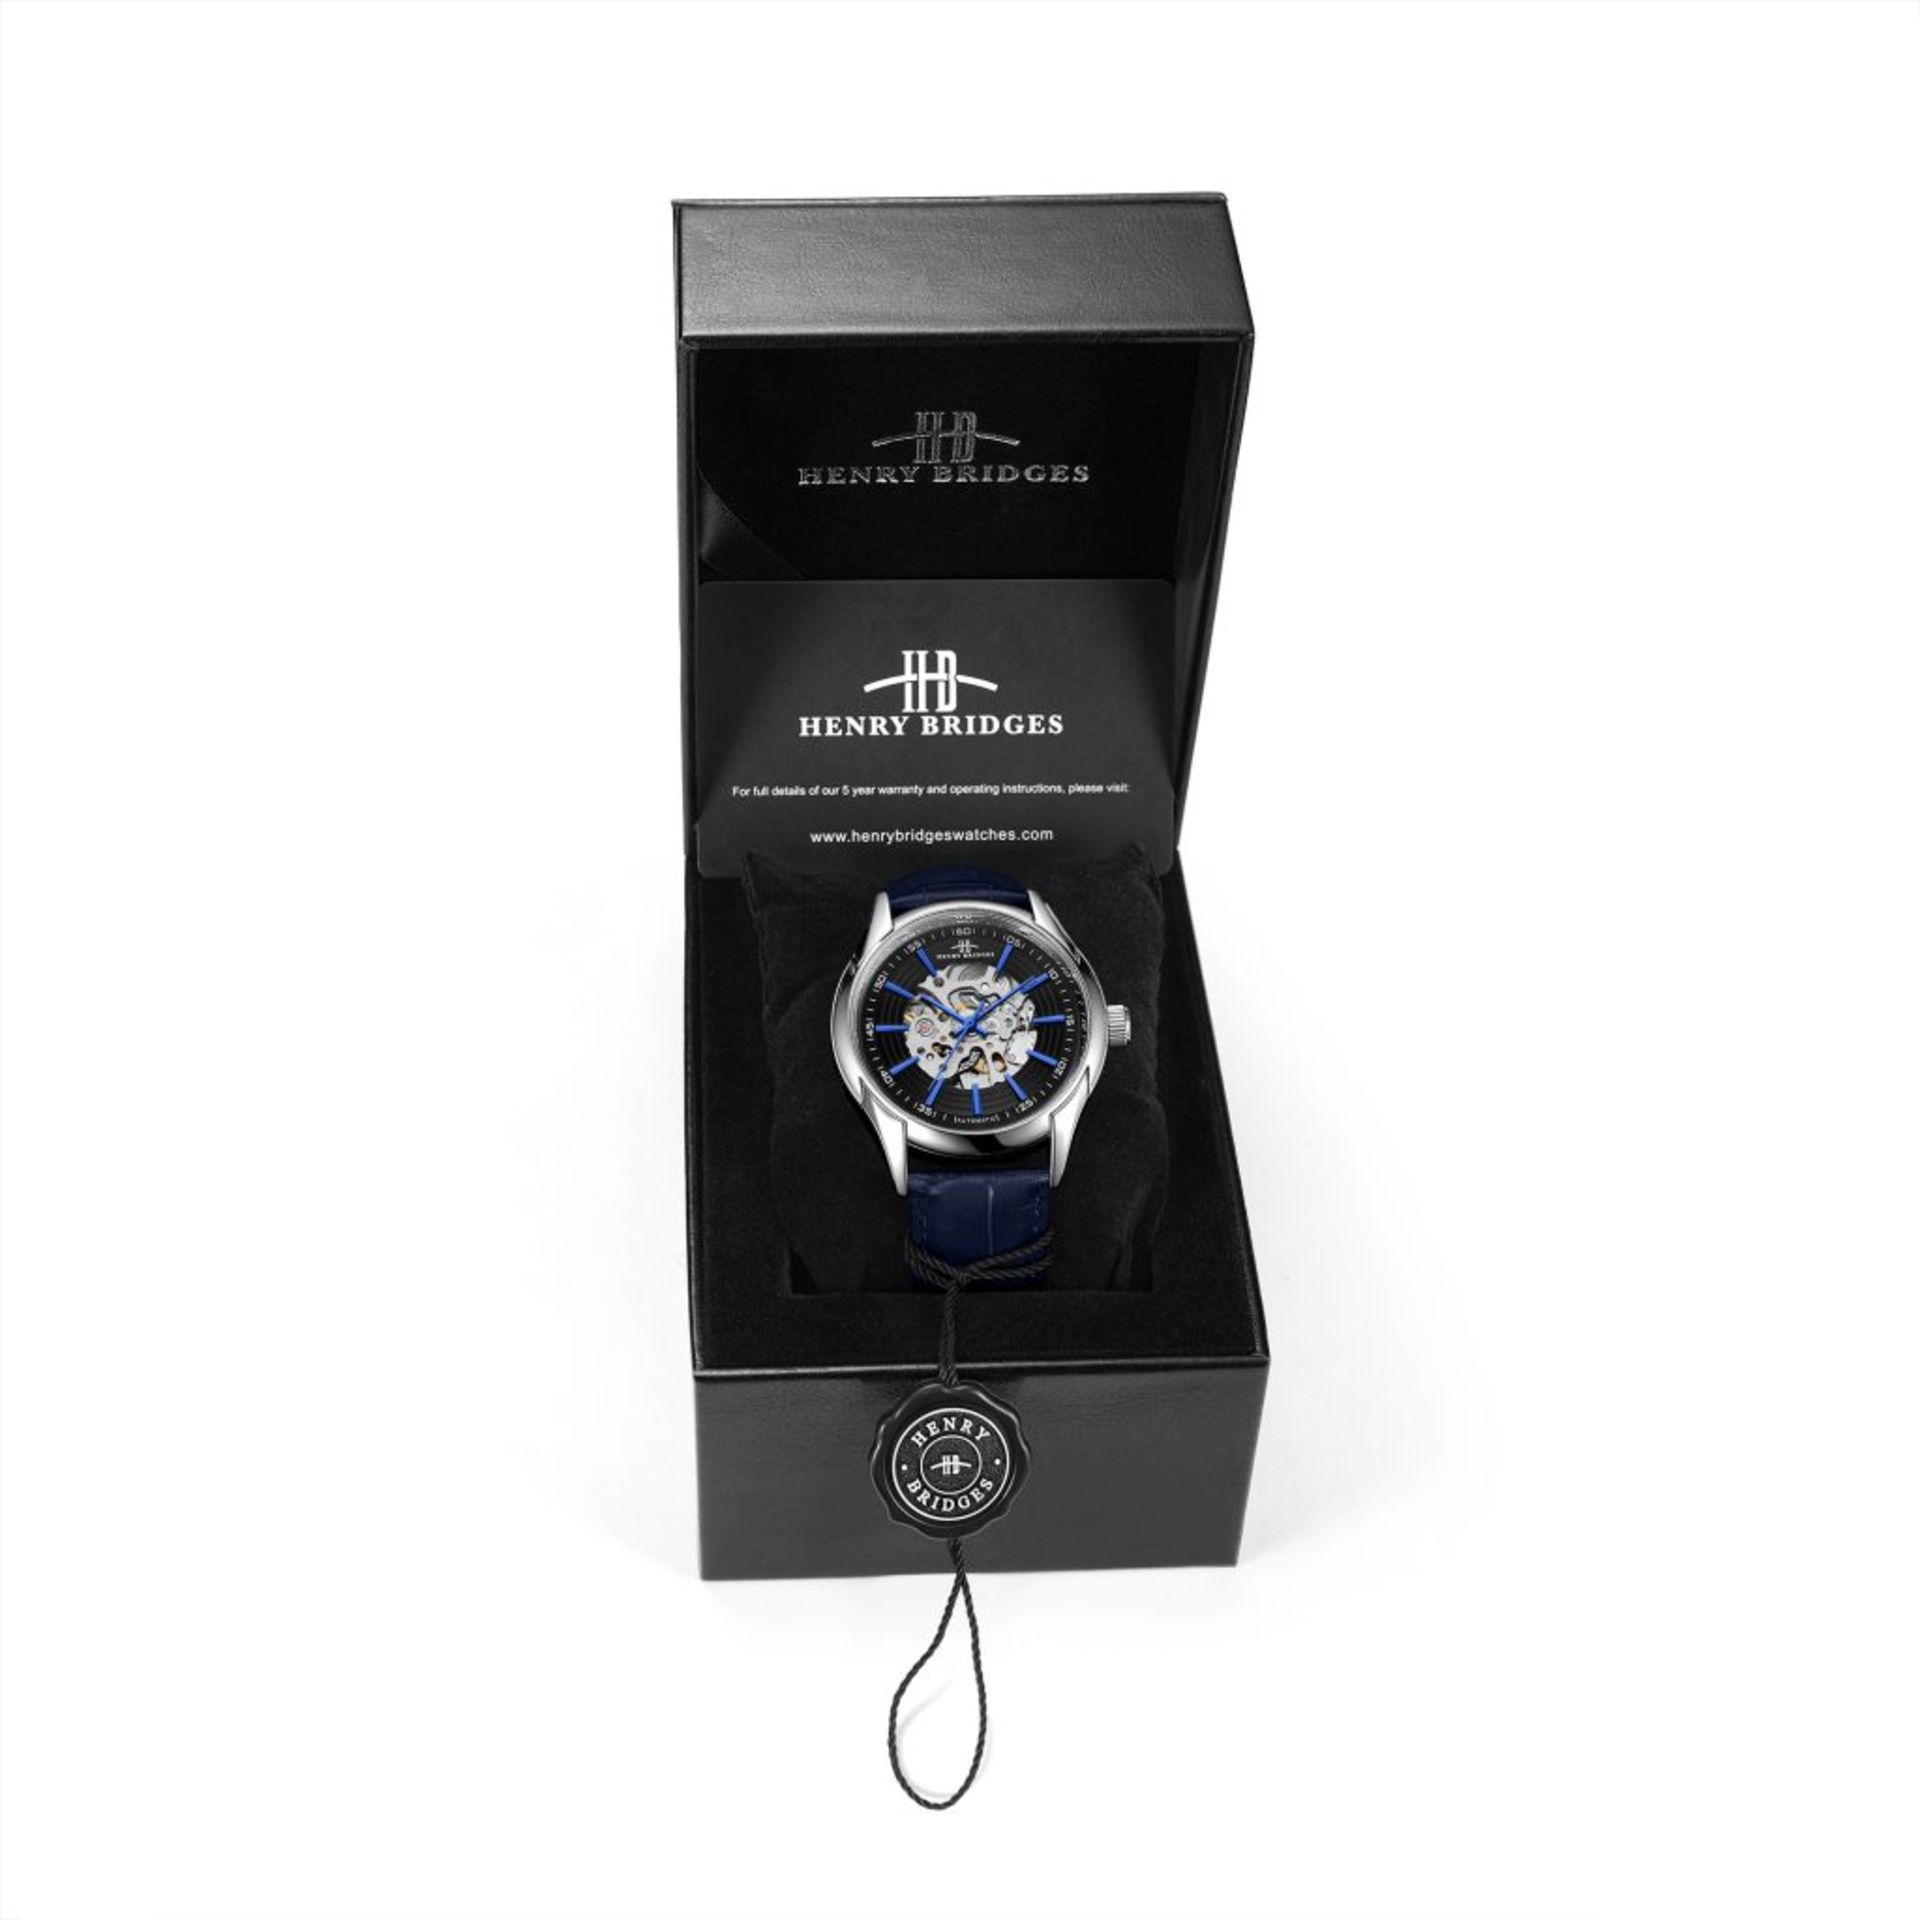 RRP £550 Mens Henry Bridges Infinity Blue Watch, Leather Strap - Image 2 of 2